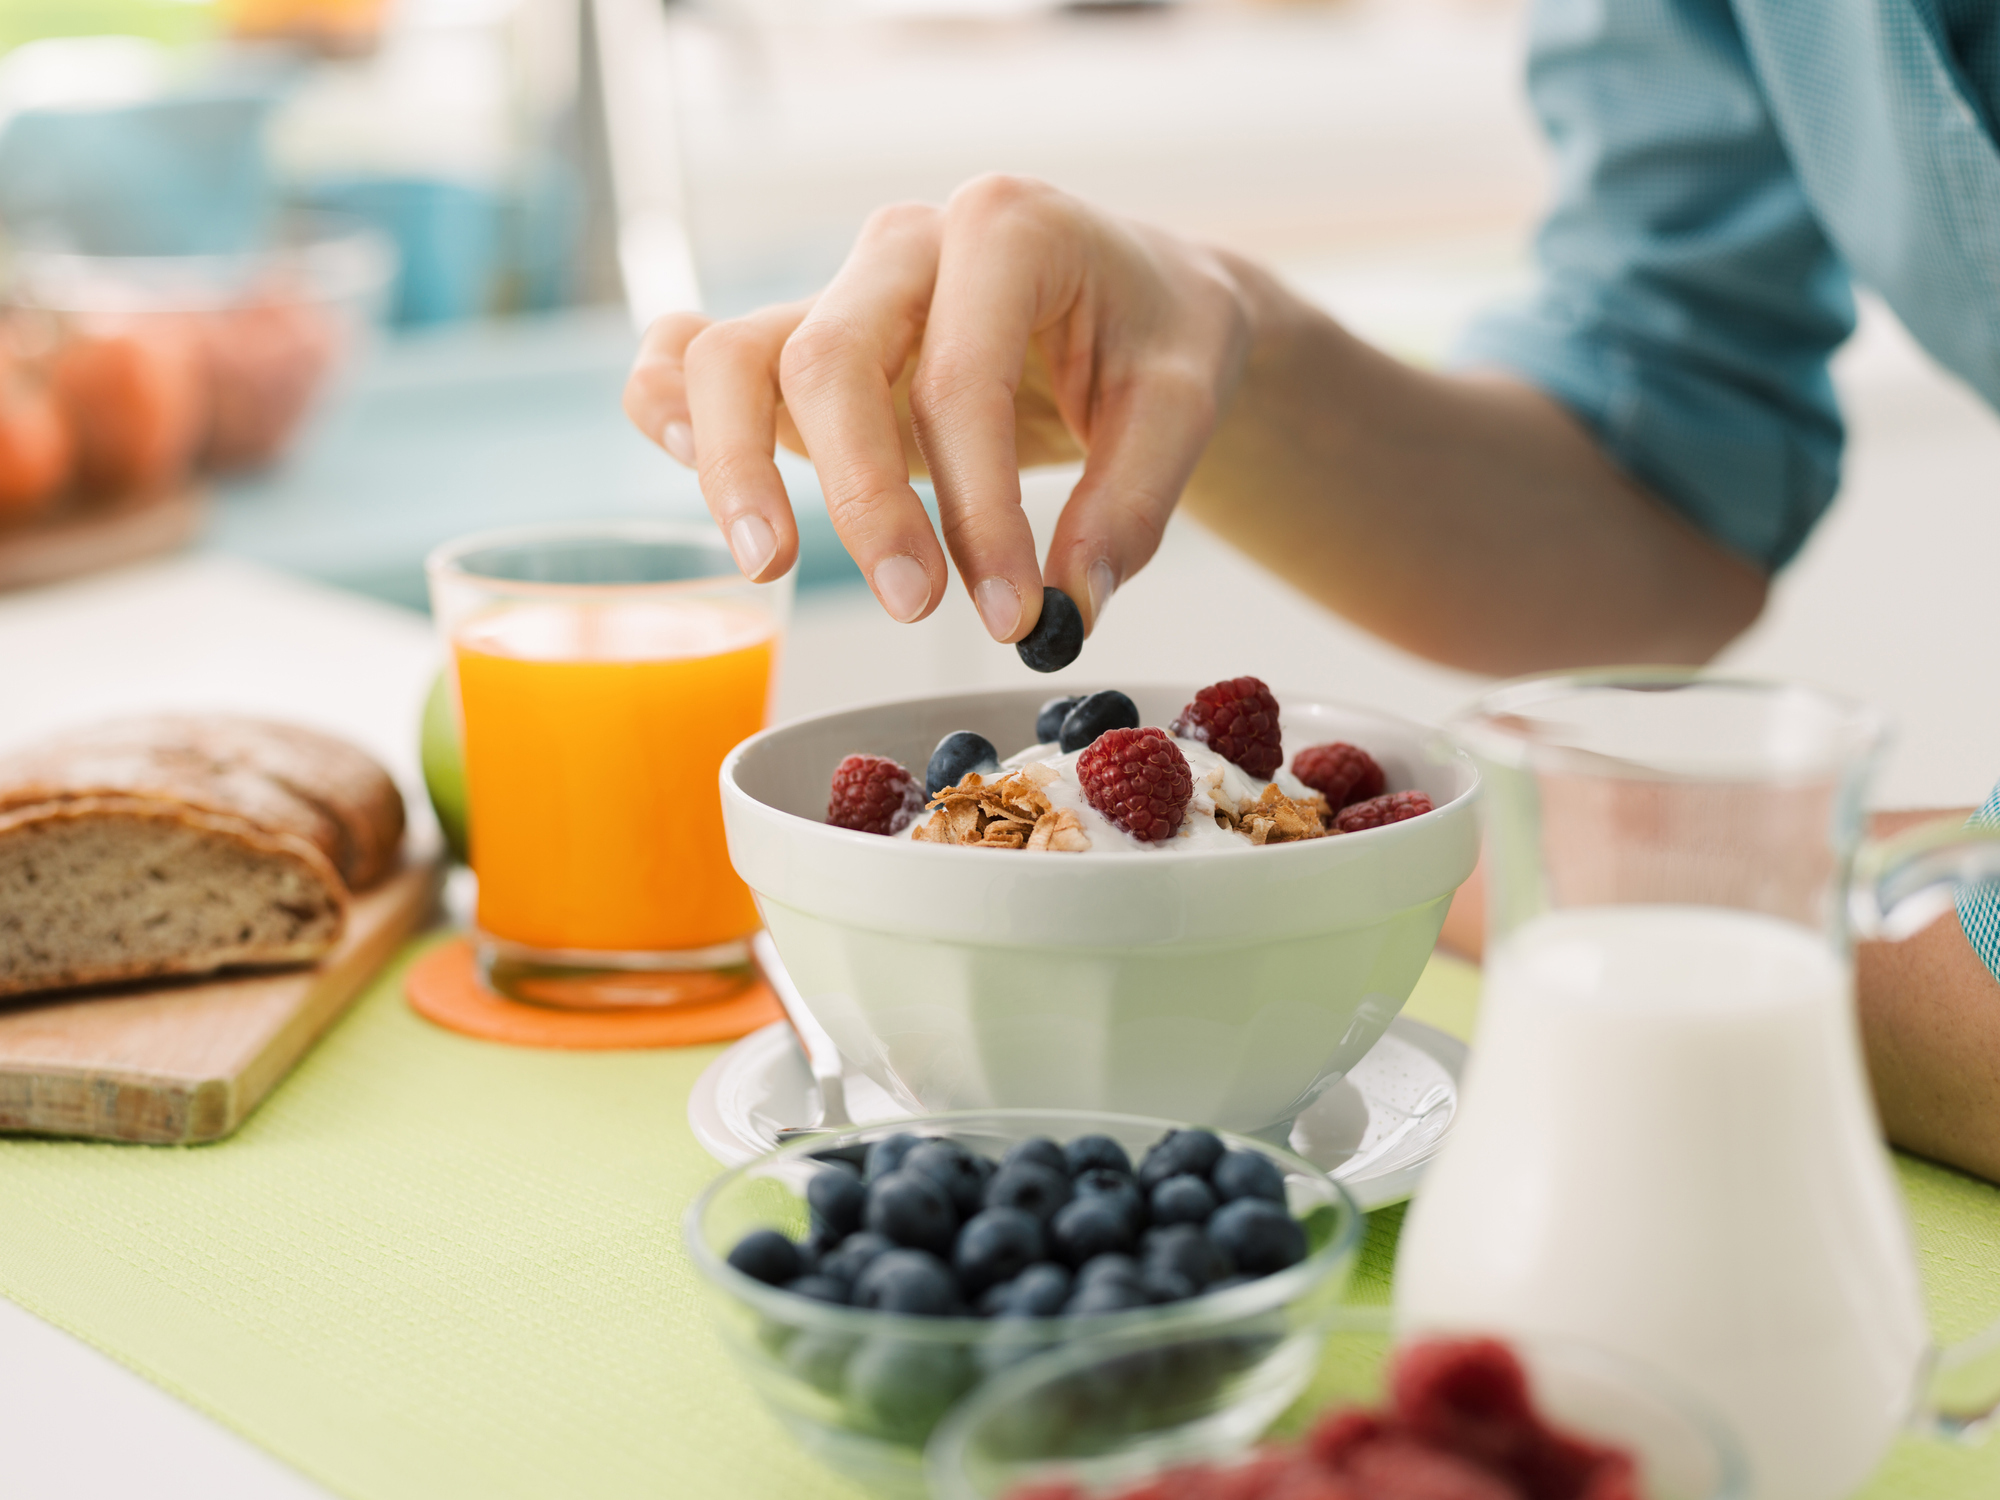 The breakfast that increases risk of death from heart disease 87%